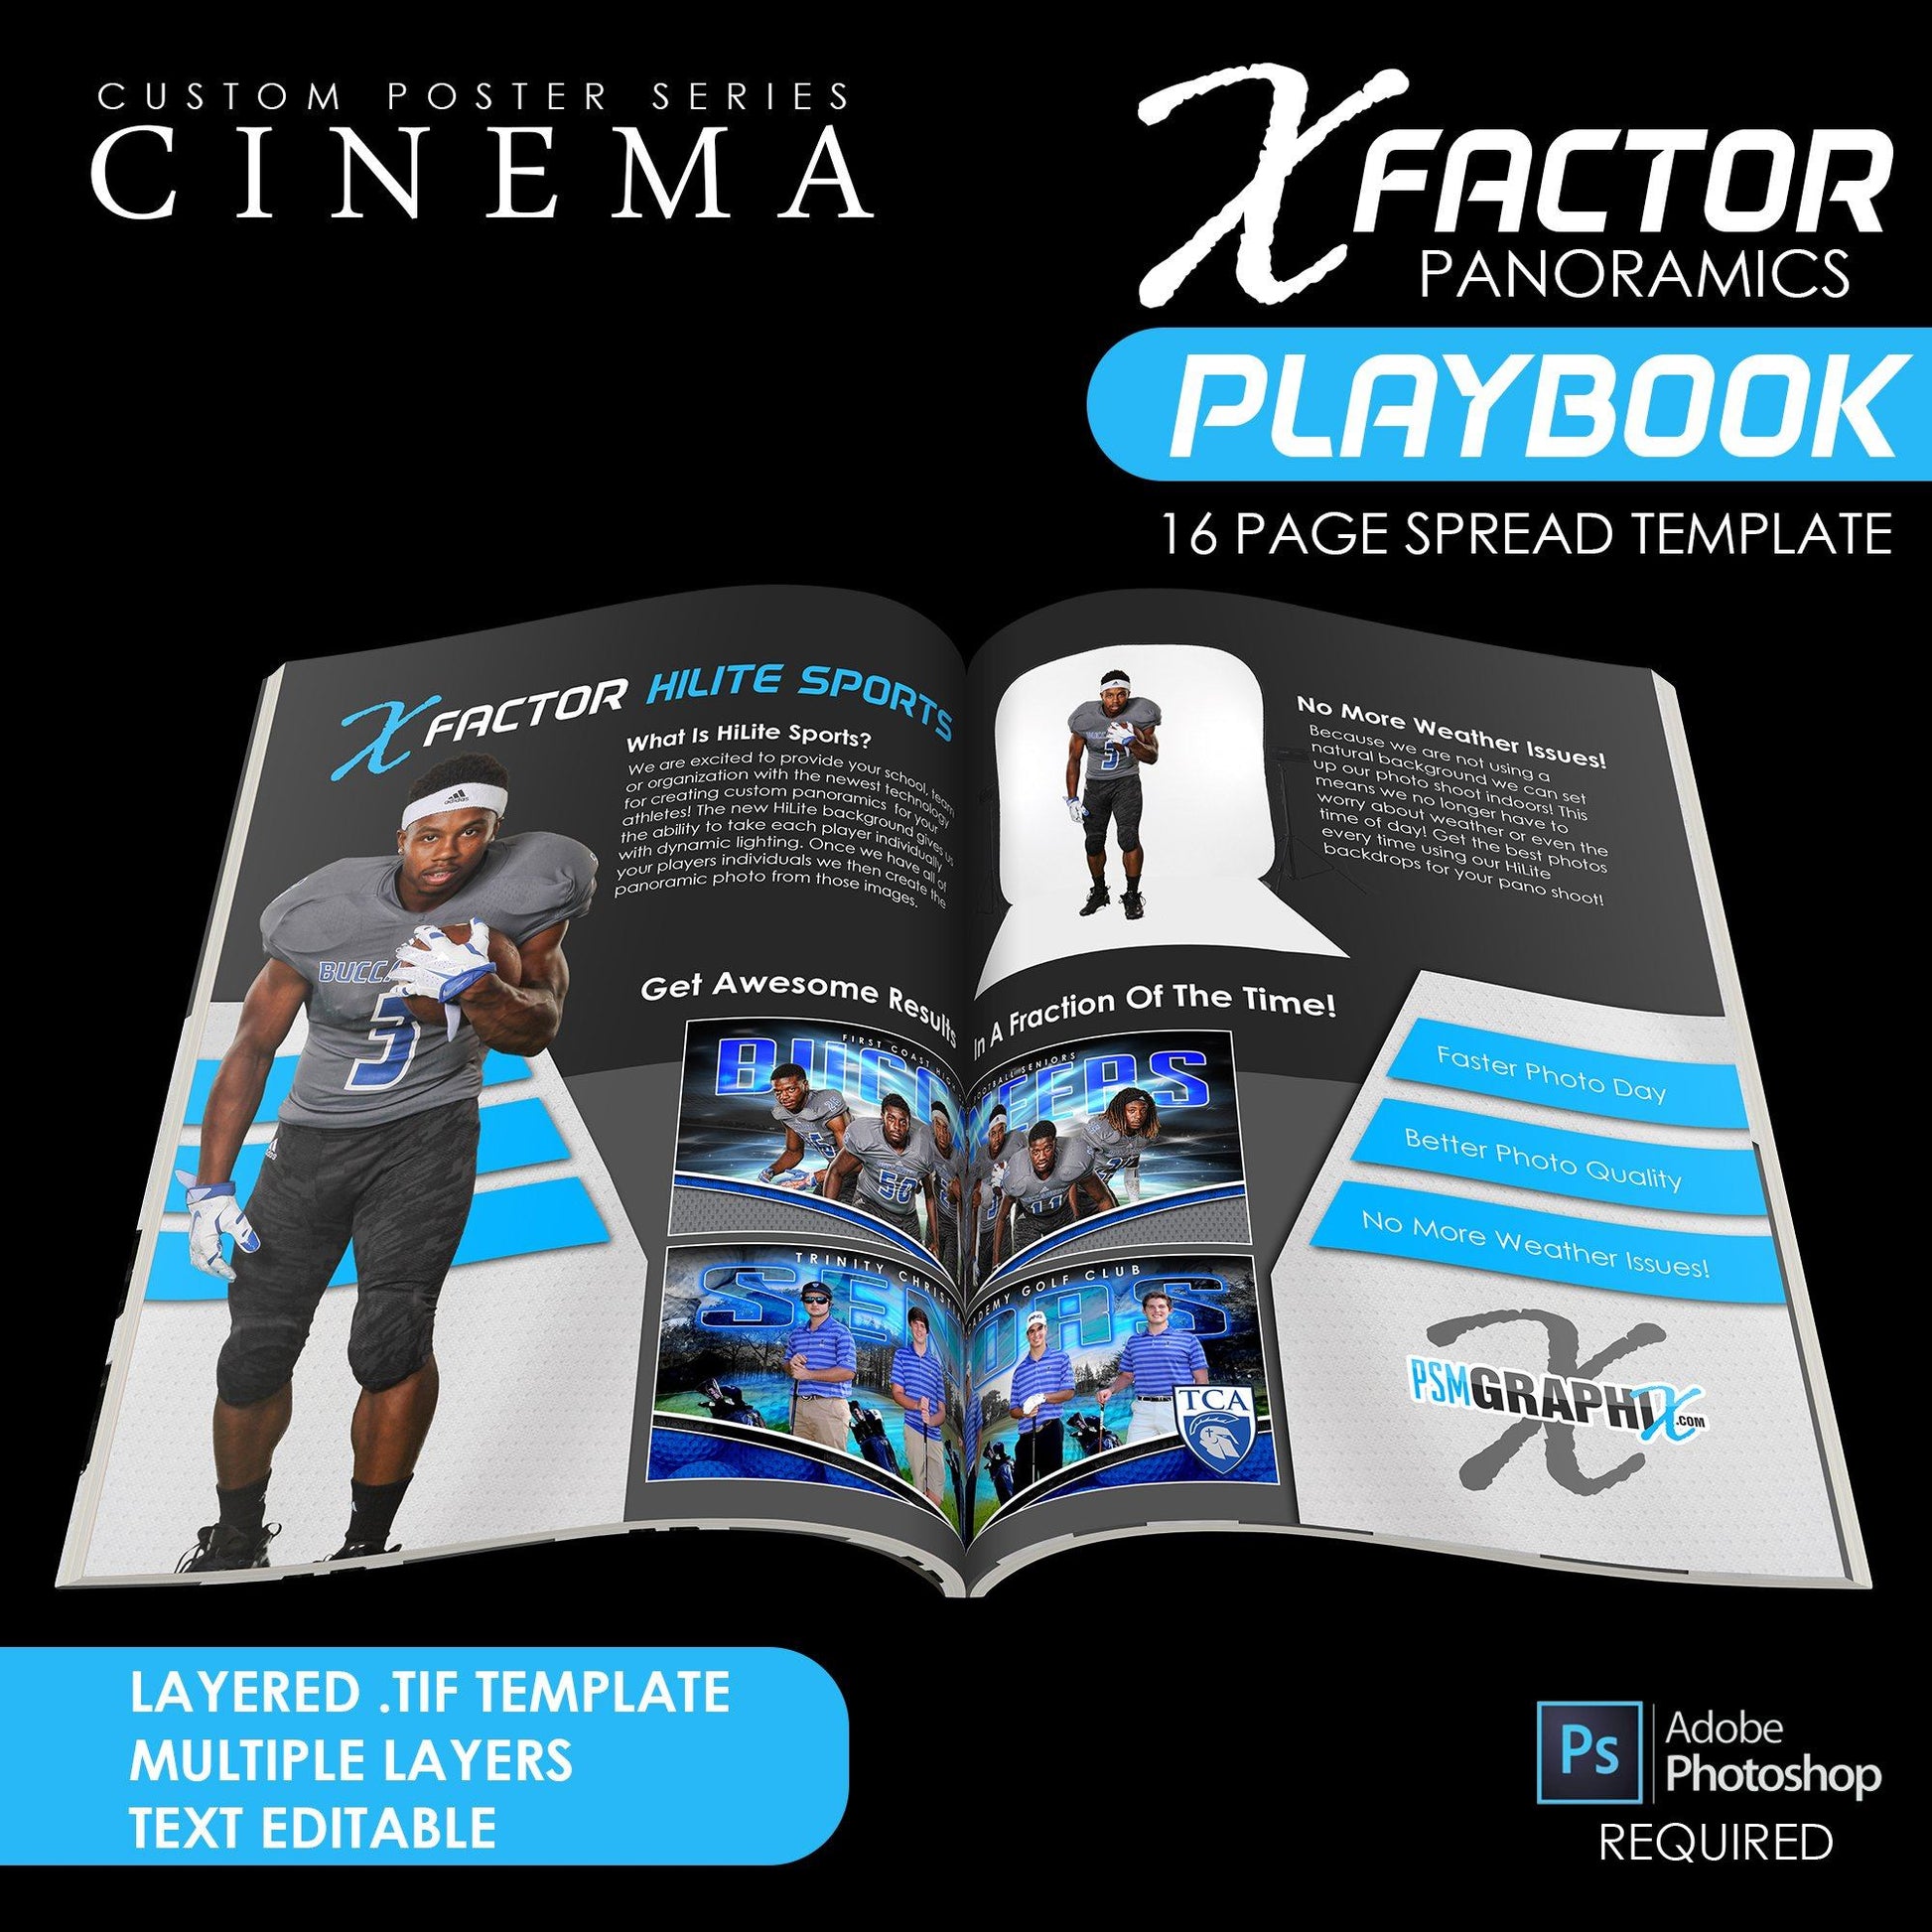 X FACTOR Panoramic Template Pack & Marketing Bundle - Limited Time Special-Photoshop Template - PSMGraphix